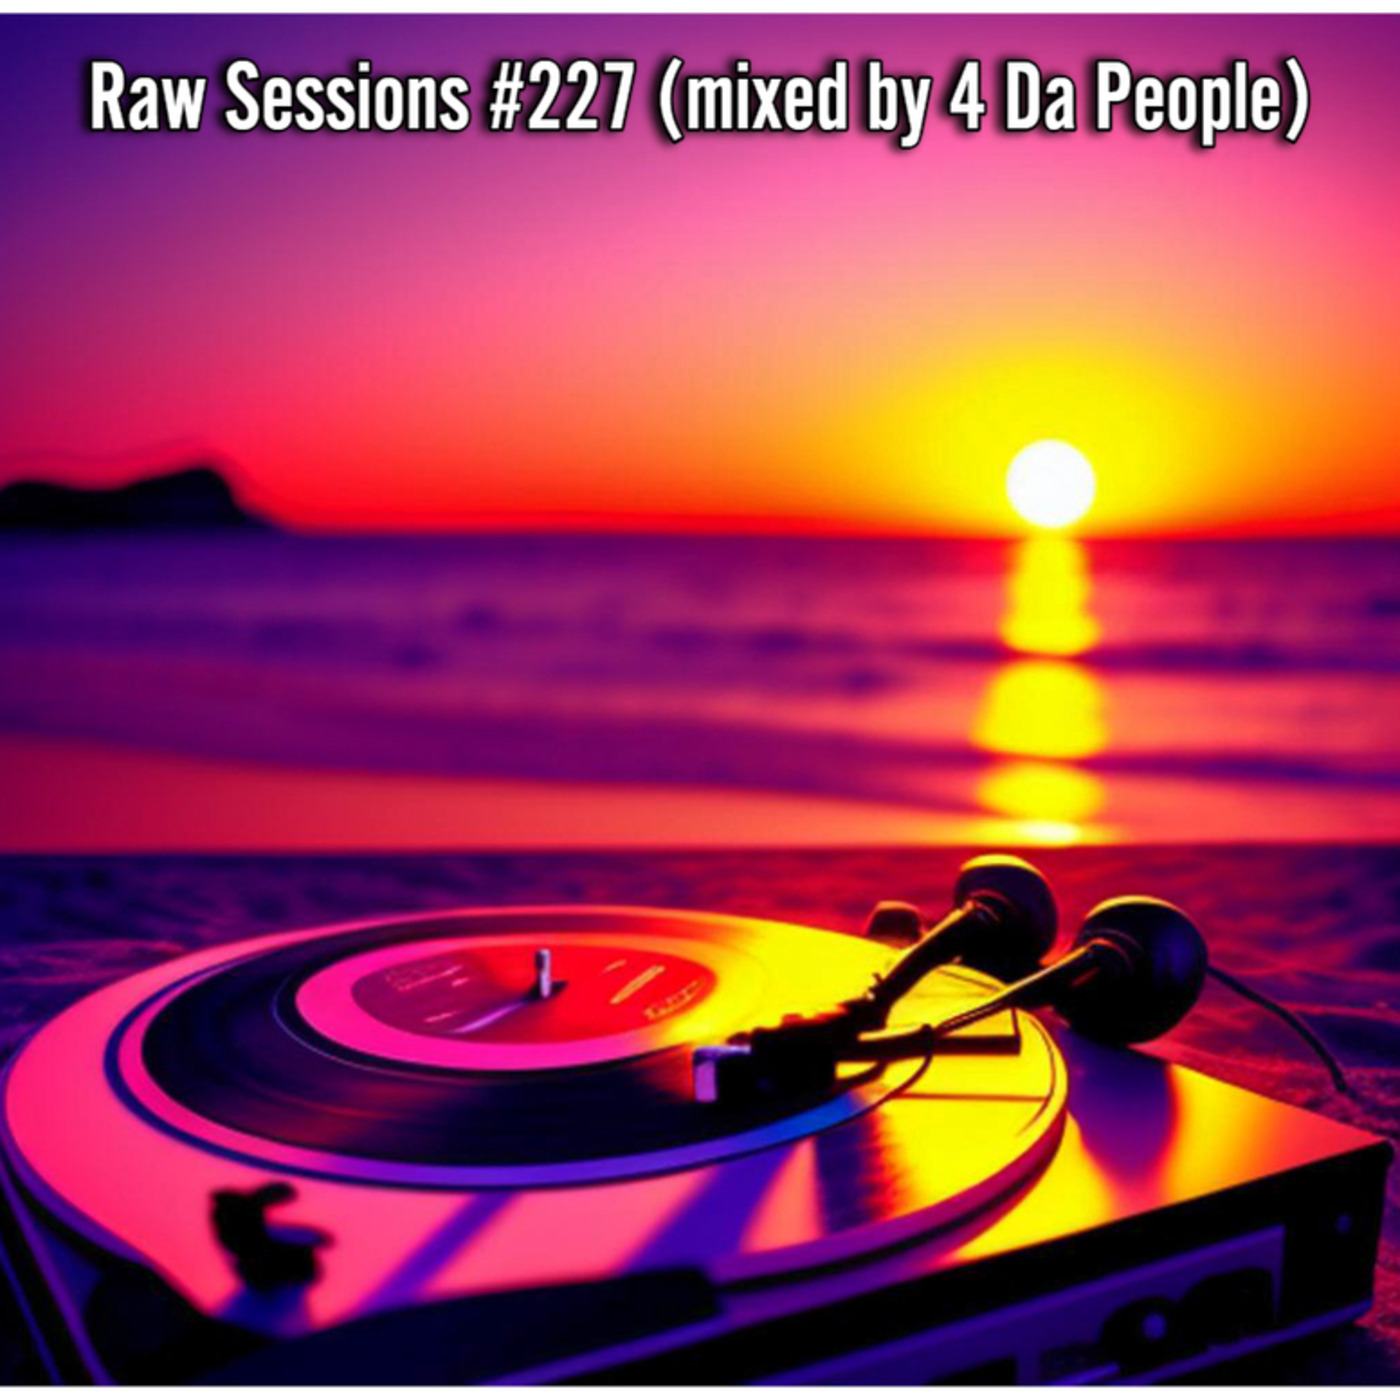 Raw Sessions #227 (mixed by 4 Da People)